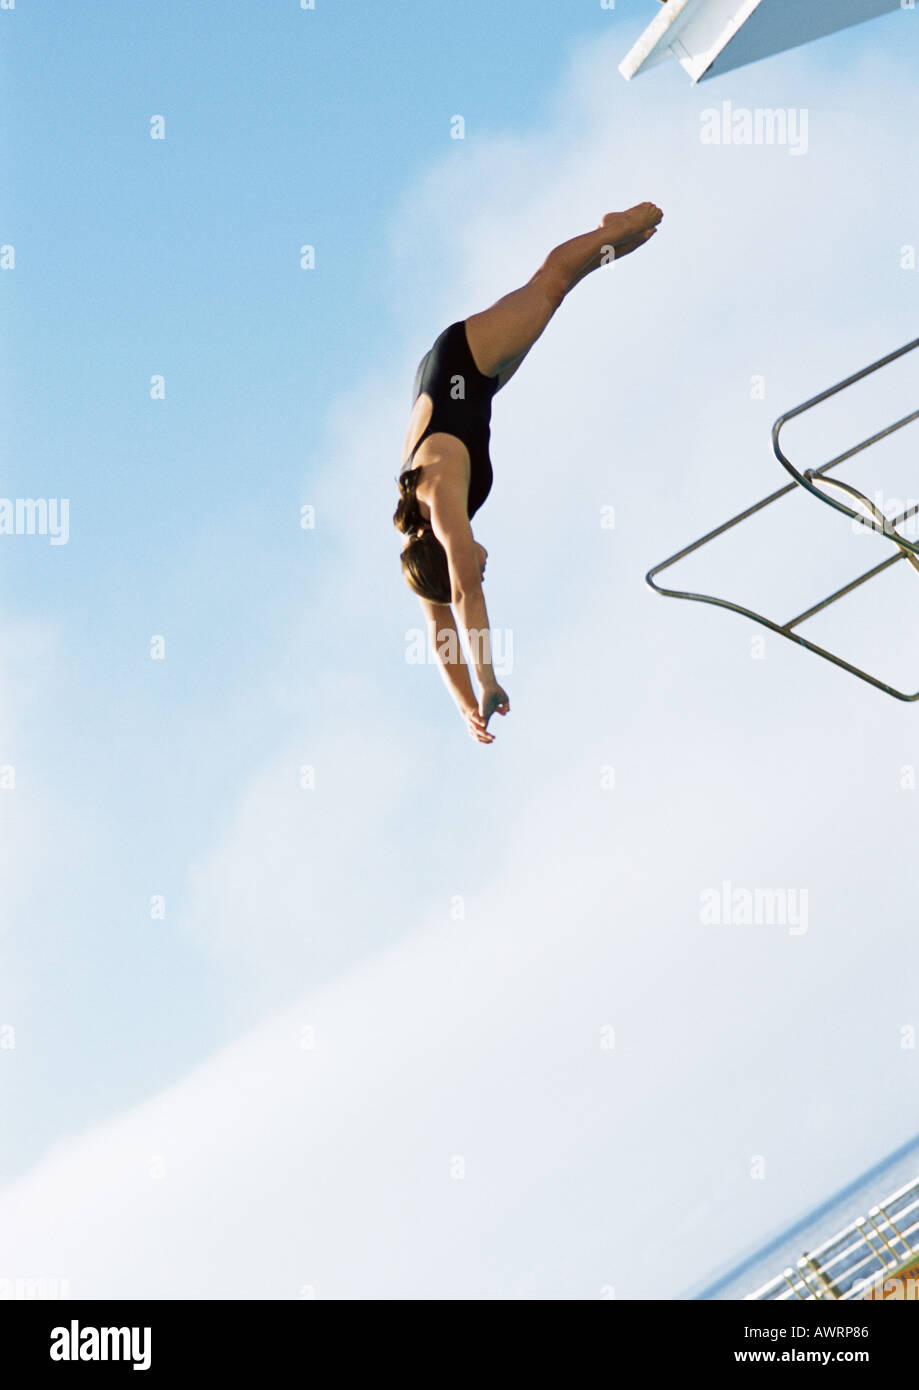 Woman in mid-dive, low angle view, full length, blue sky in background Stock Photo